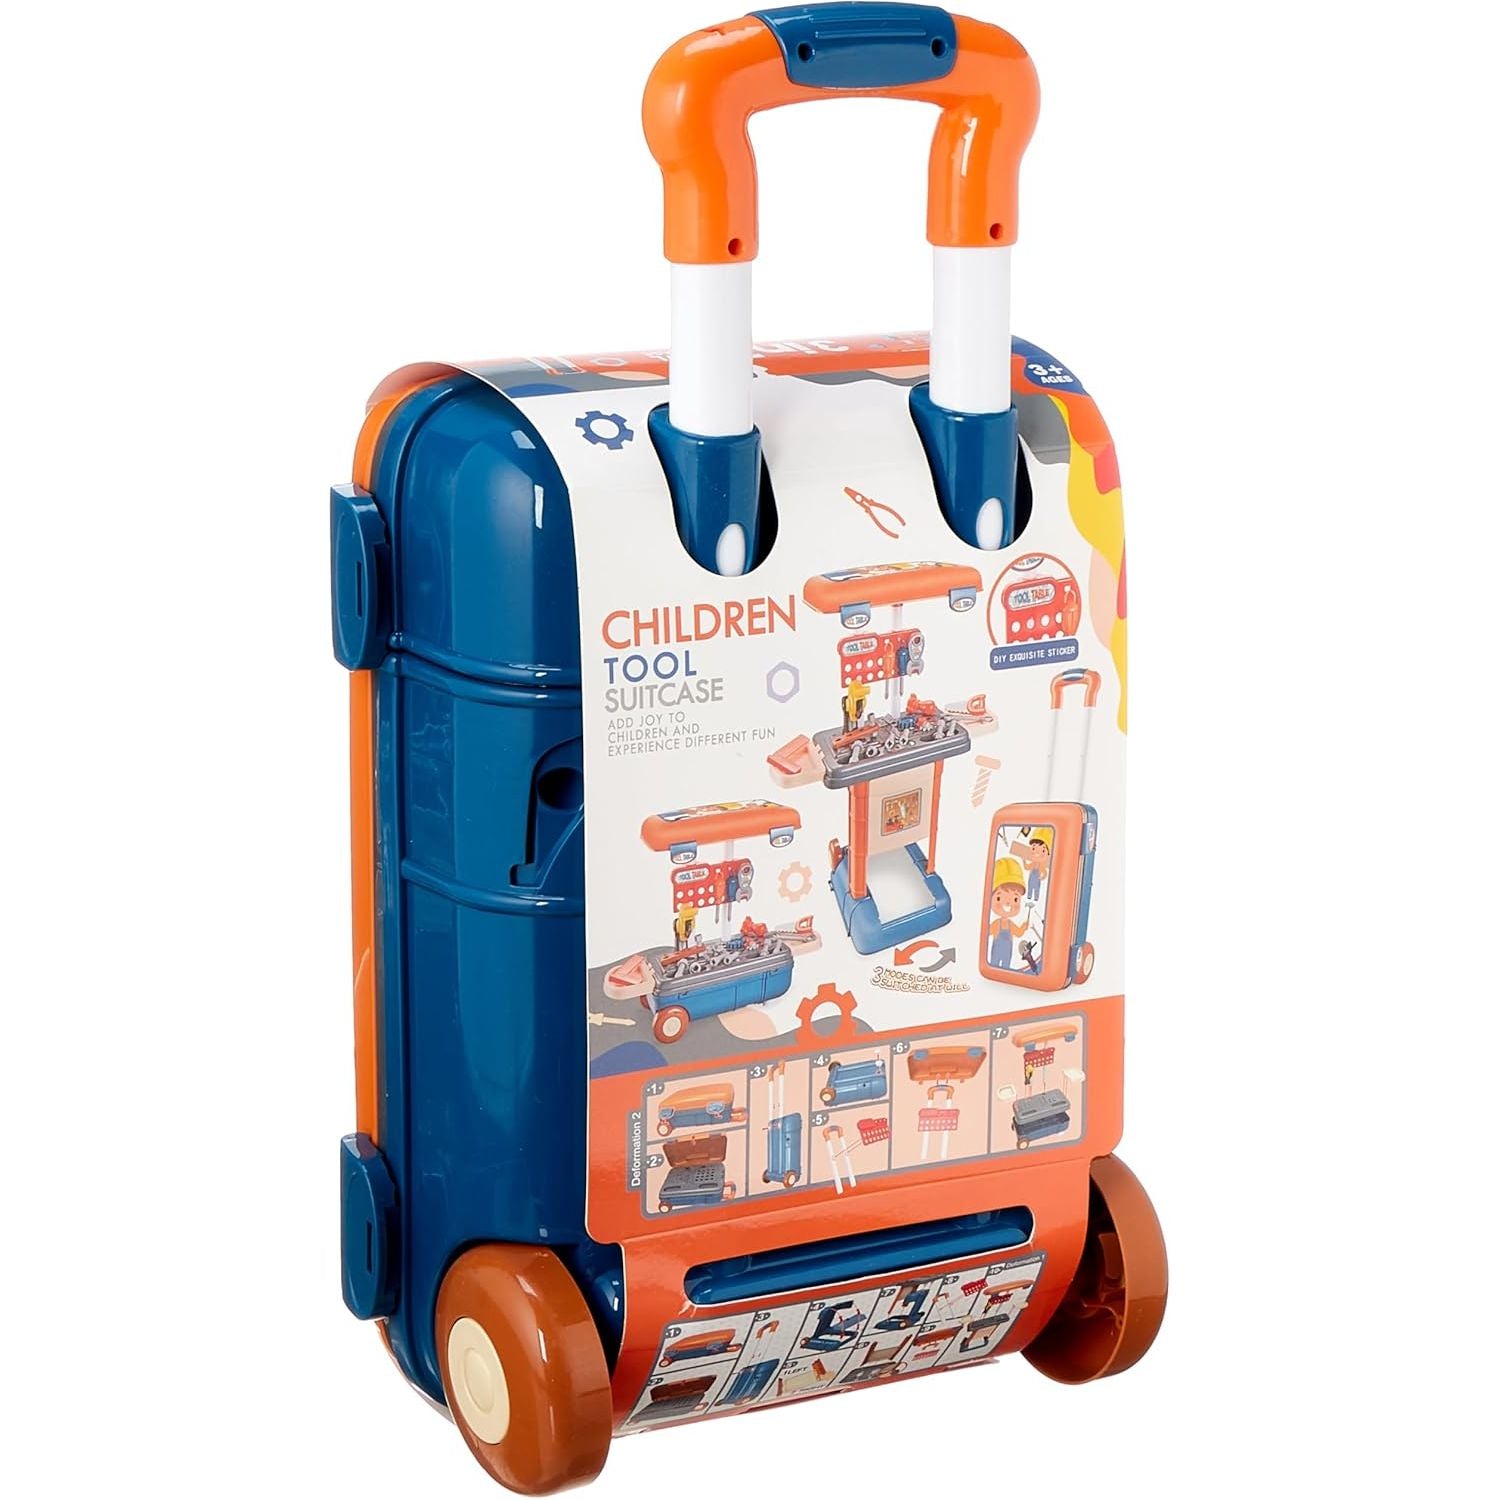 3 IN 1 Tool Suitcase children tools +3 - 009-013A